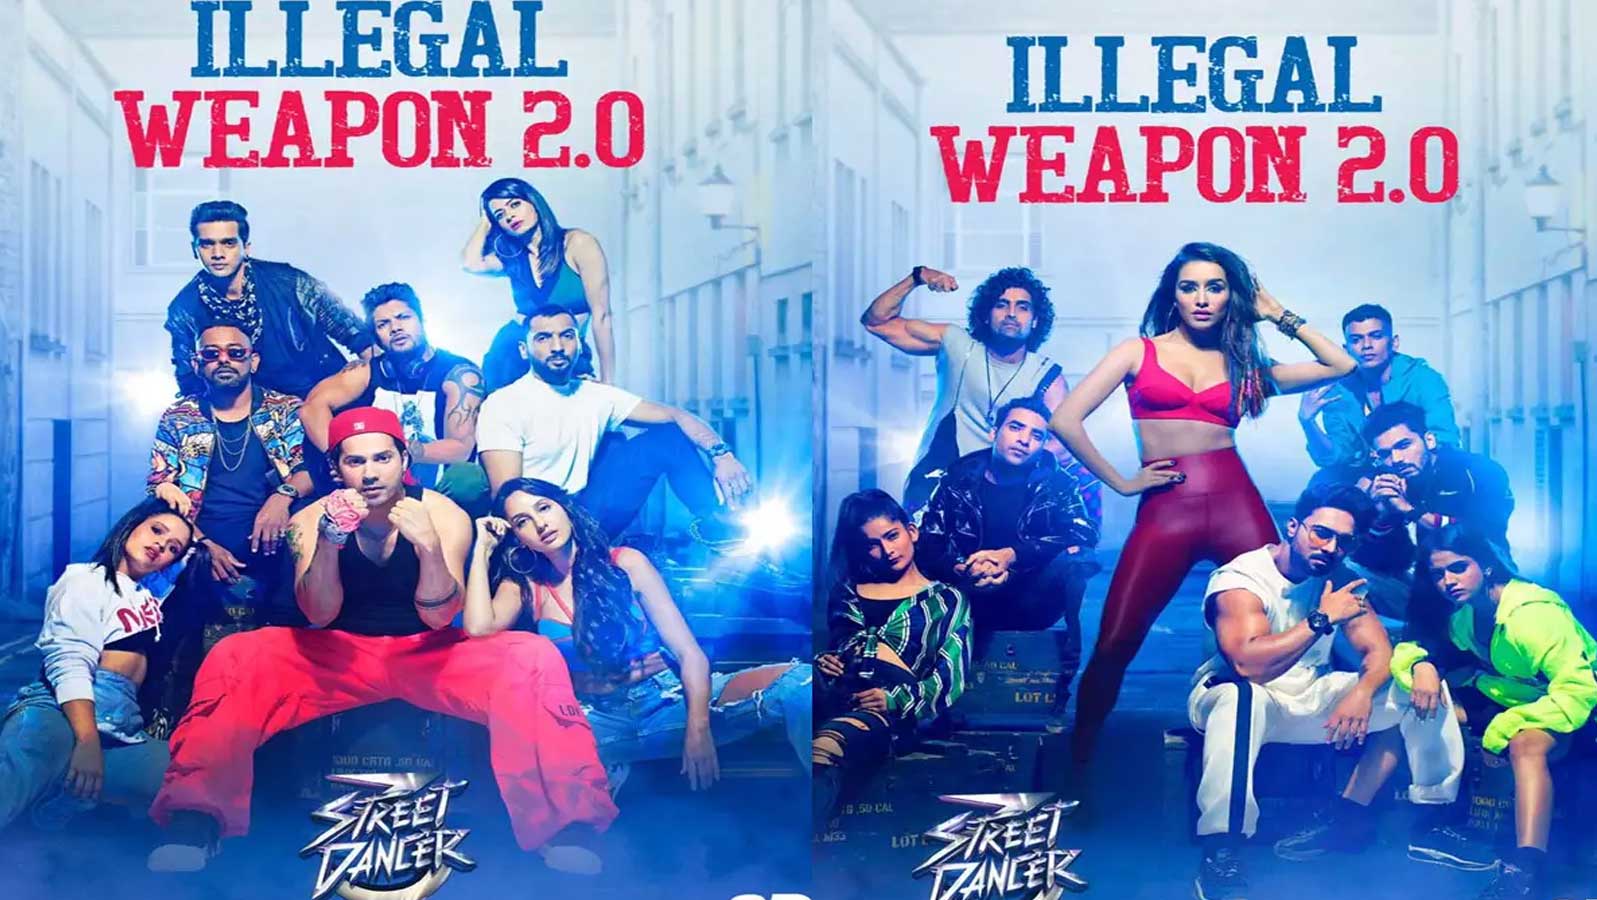 Street Dancer 3d Varun Dhawan And Shraddha Kapoor Promise A Dance Off Unlike Any Other In Illegal Weapon 2 Song That Drops Tomorrow Hindi Movie News Times Of India